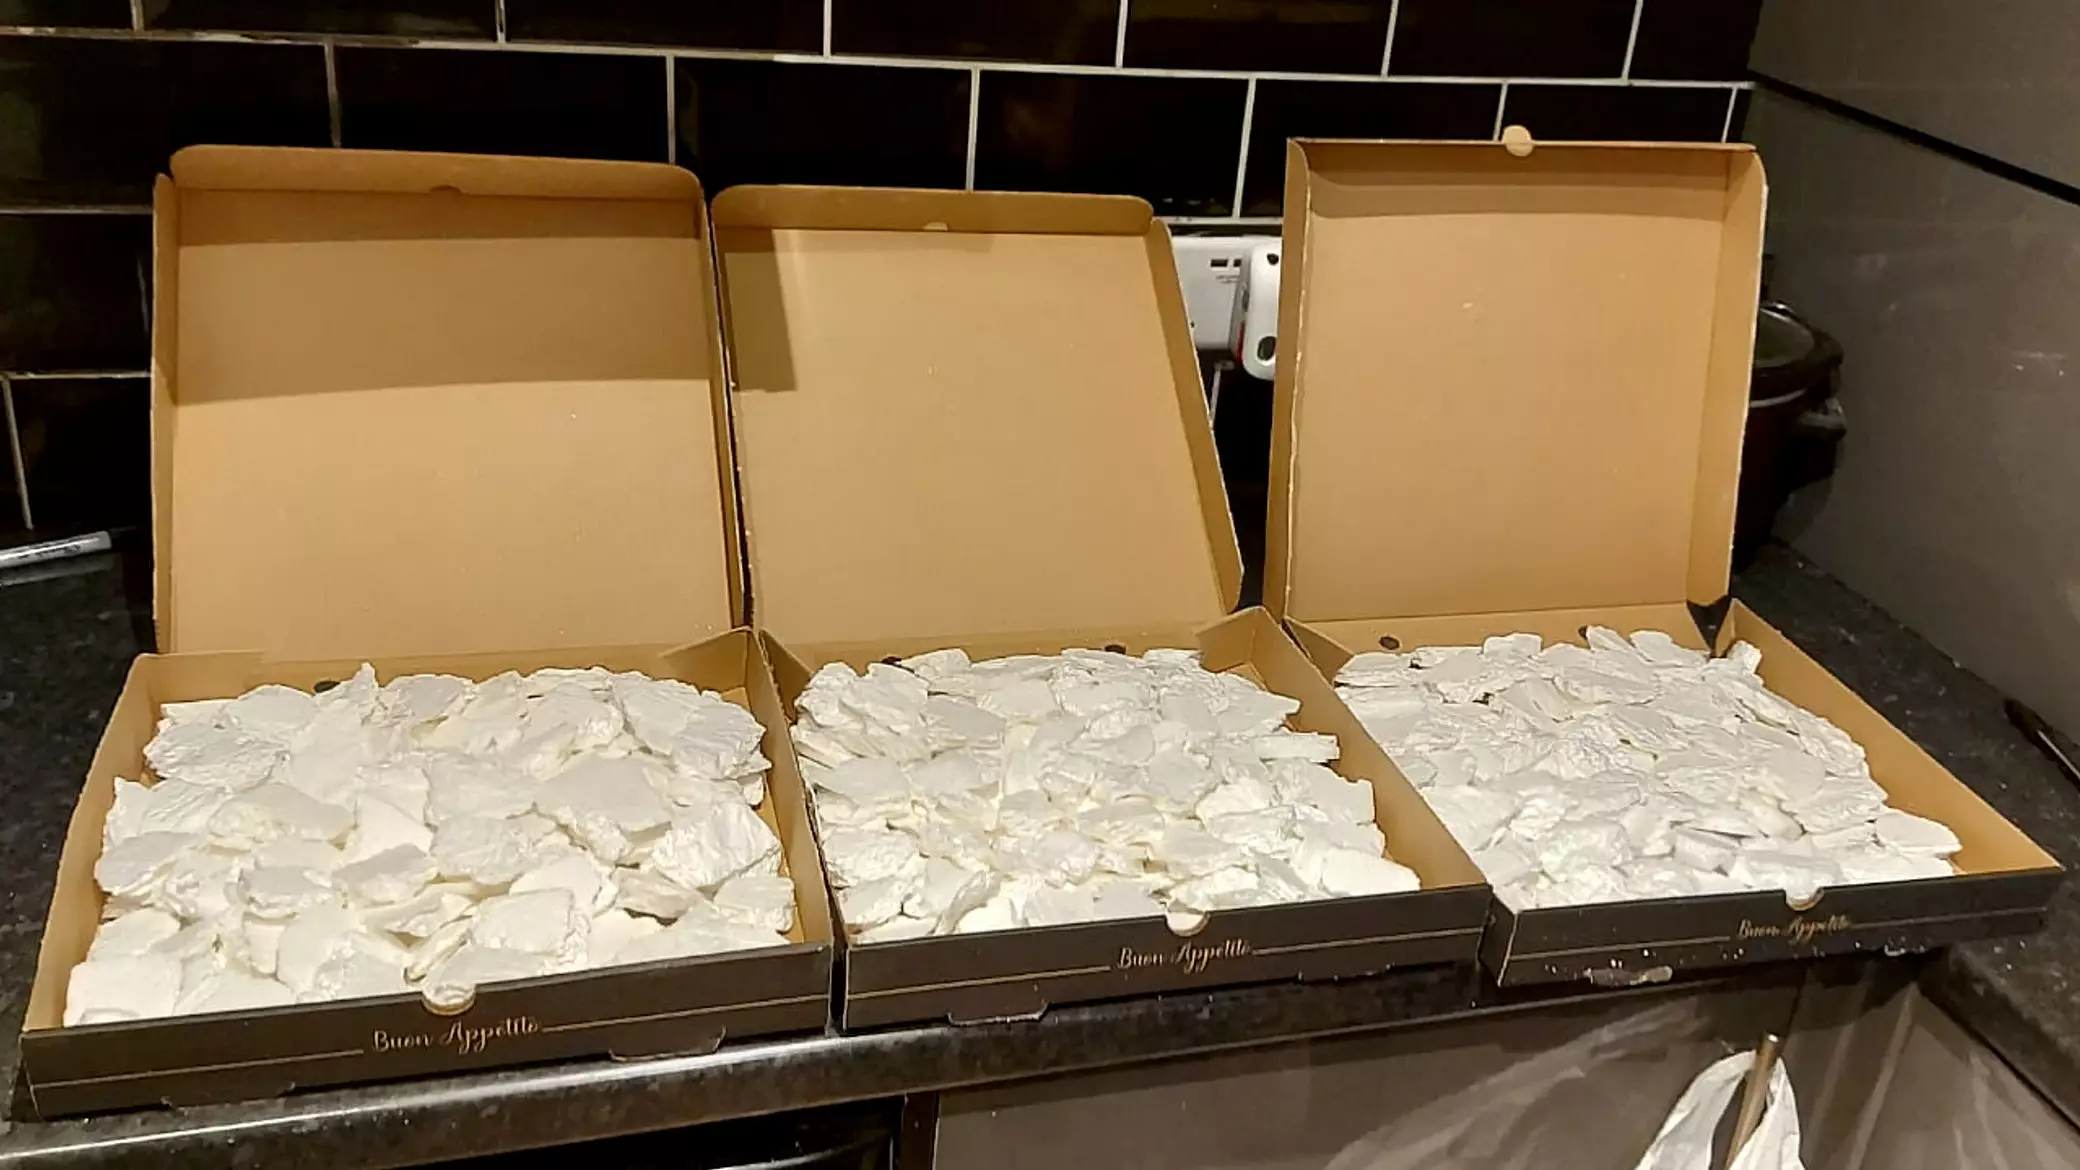 Police Find £500,000 Of Suspected Drugs In Pizza Boxes